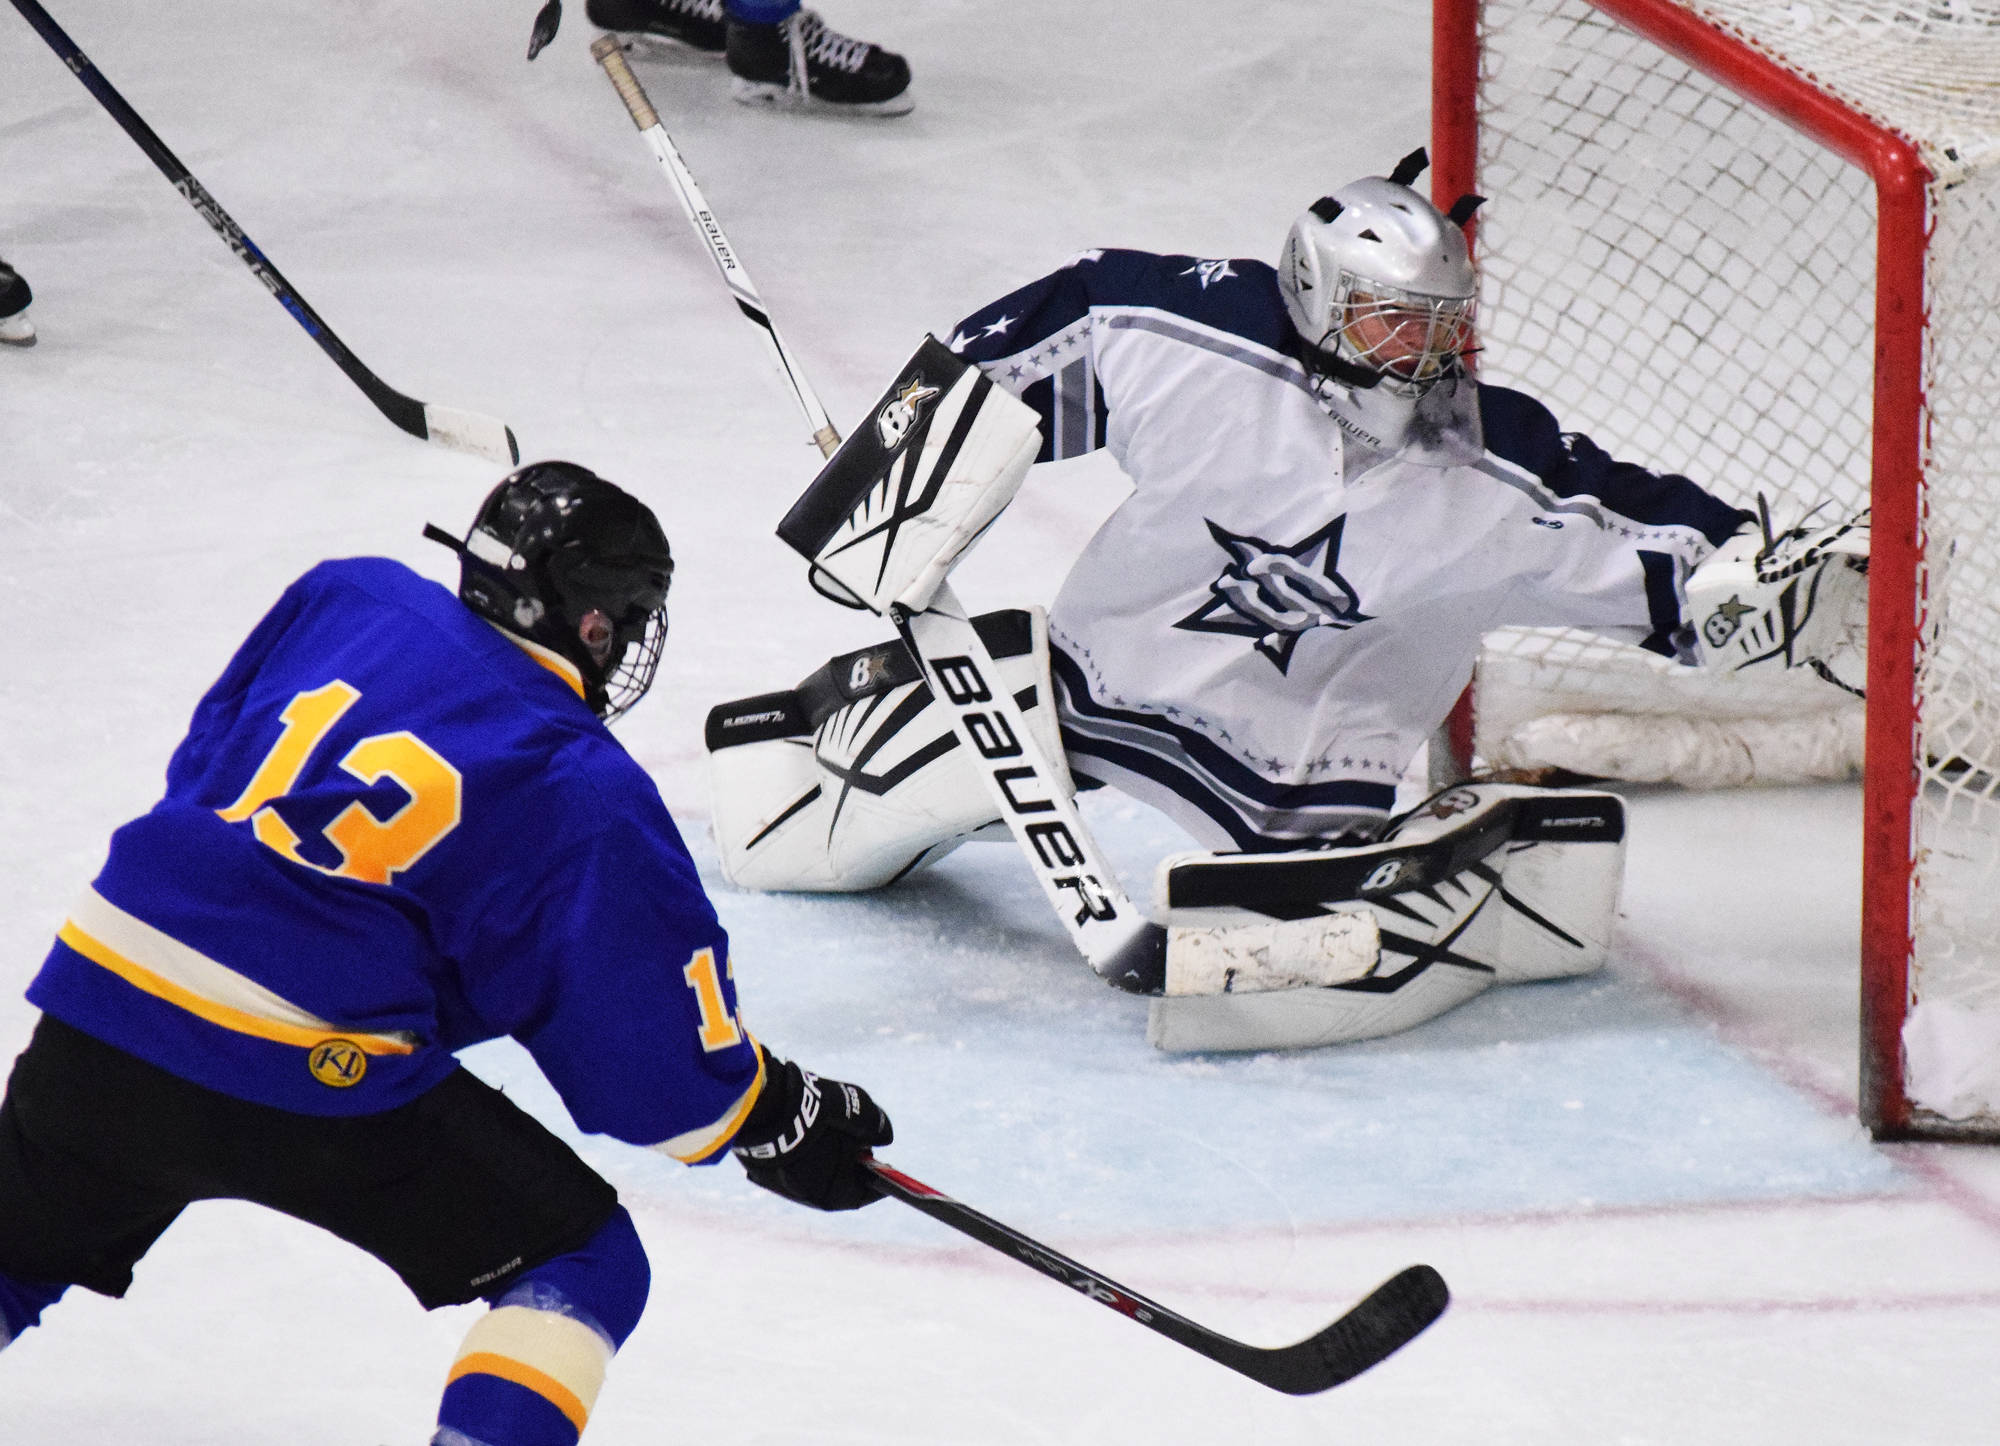 Soldotna goaltender Corbin Wirz reaches out too late to save a goal by Monroe Catholic’s Antonio Szumigala Thursday at the Peninsula Ice Challenge at the Soldotna Regional Sports Complex. (Photo by Joey Klecka/Peninsula Clarion)